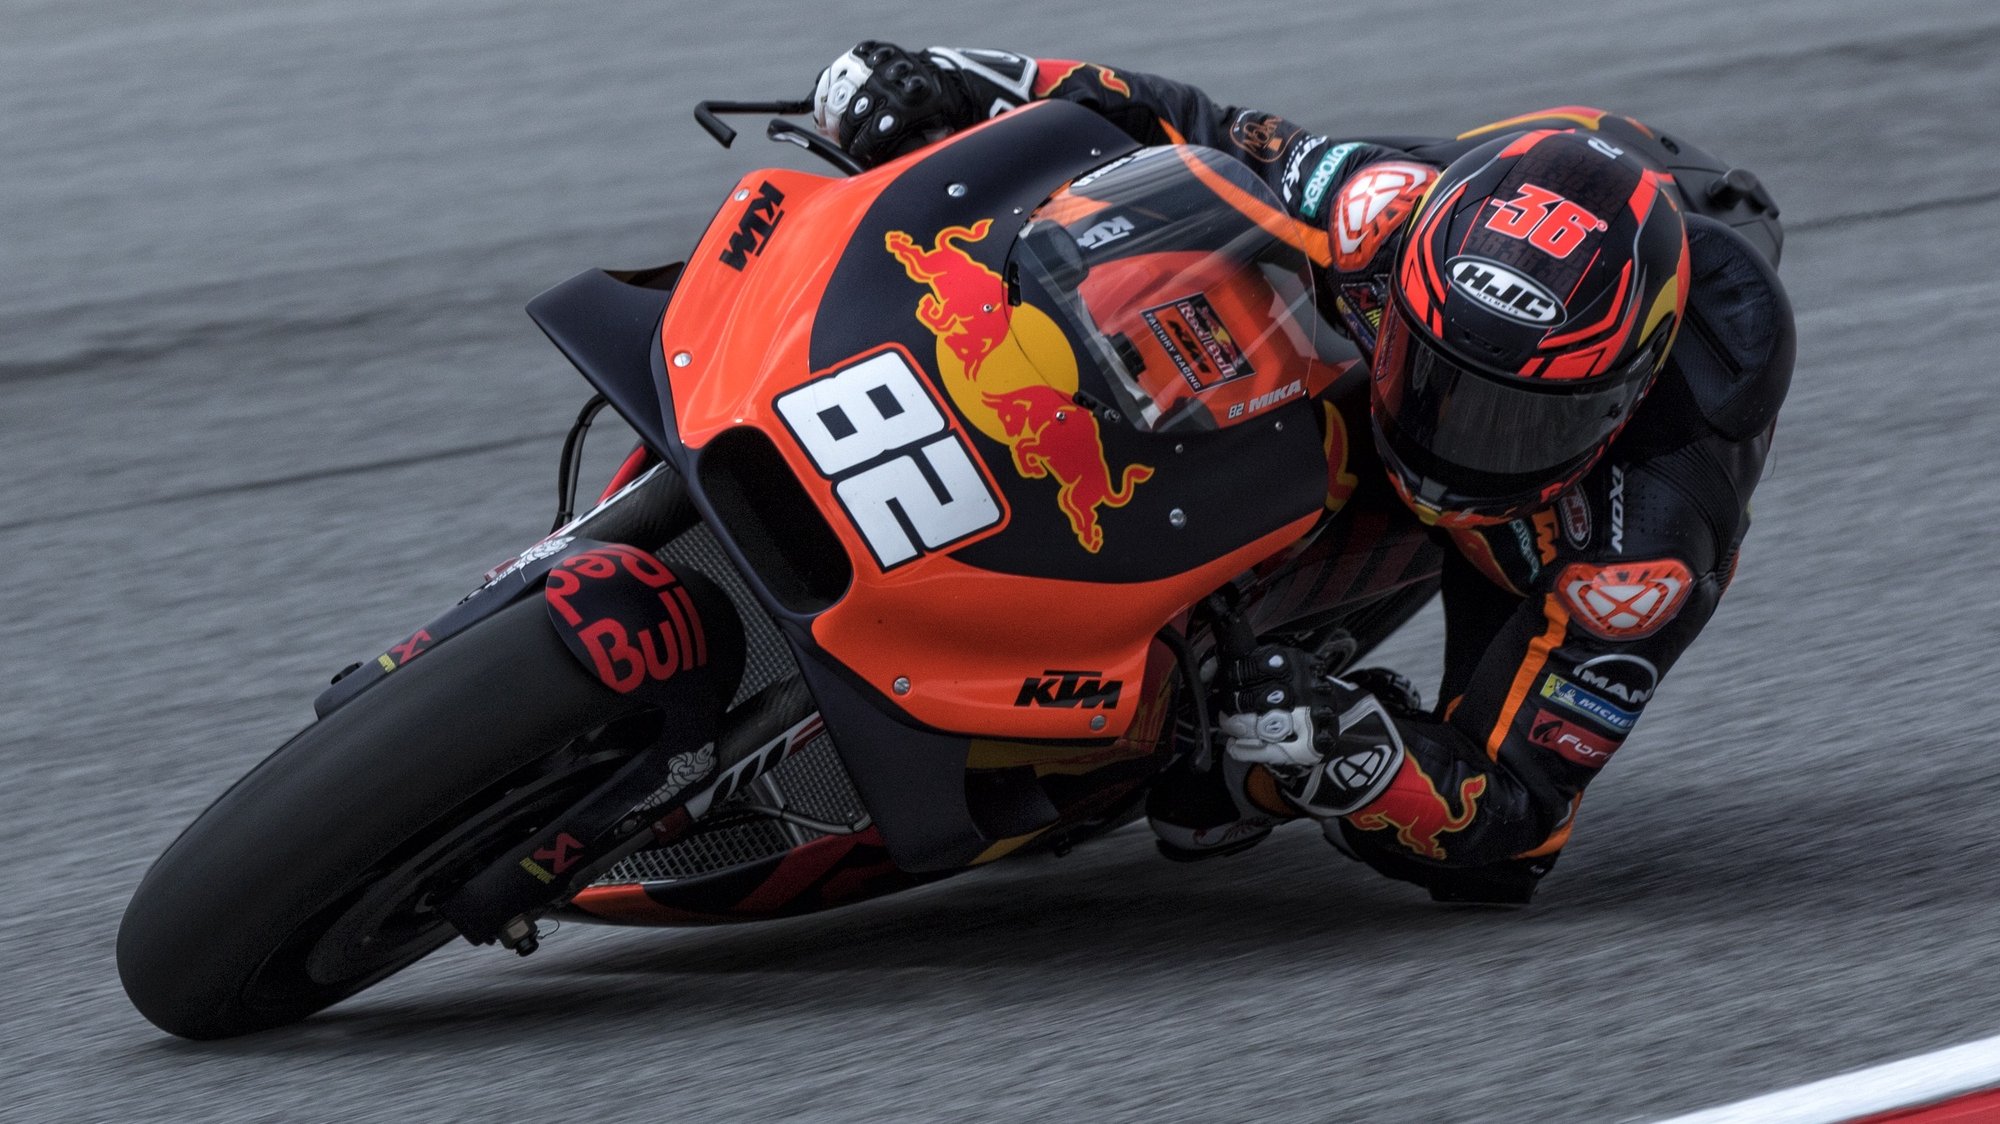 epa07963750 Finnish MotoGP rider Mika Kallio of Red Bull KTM Factory Racing in action during the free practice of the Motorcycle Grand Prix of Malaysia 2019 at Sepang International Circuit, Selangor, Malaysia, 01 November 2019. The 2019 Malaysia Motorcycling Grand Prix will take place on 03 November 2019.  EPA/FAZRY ISMAIL